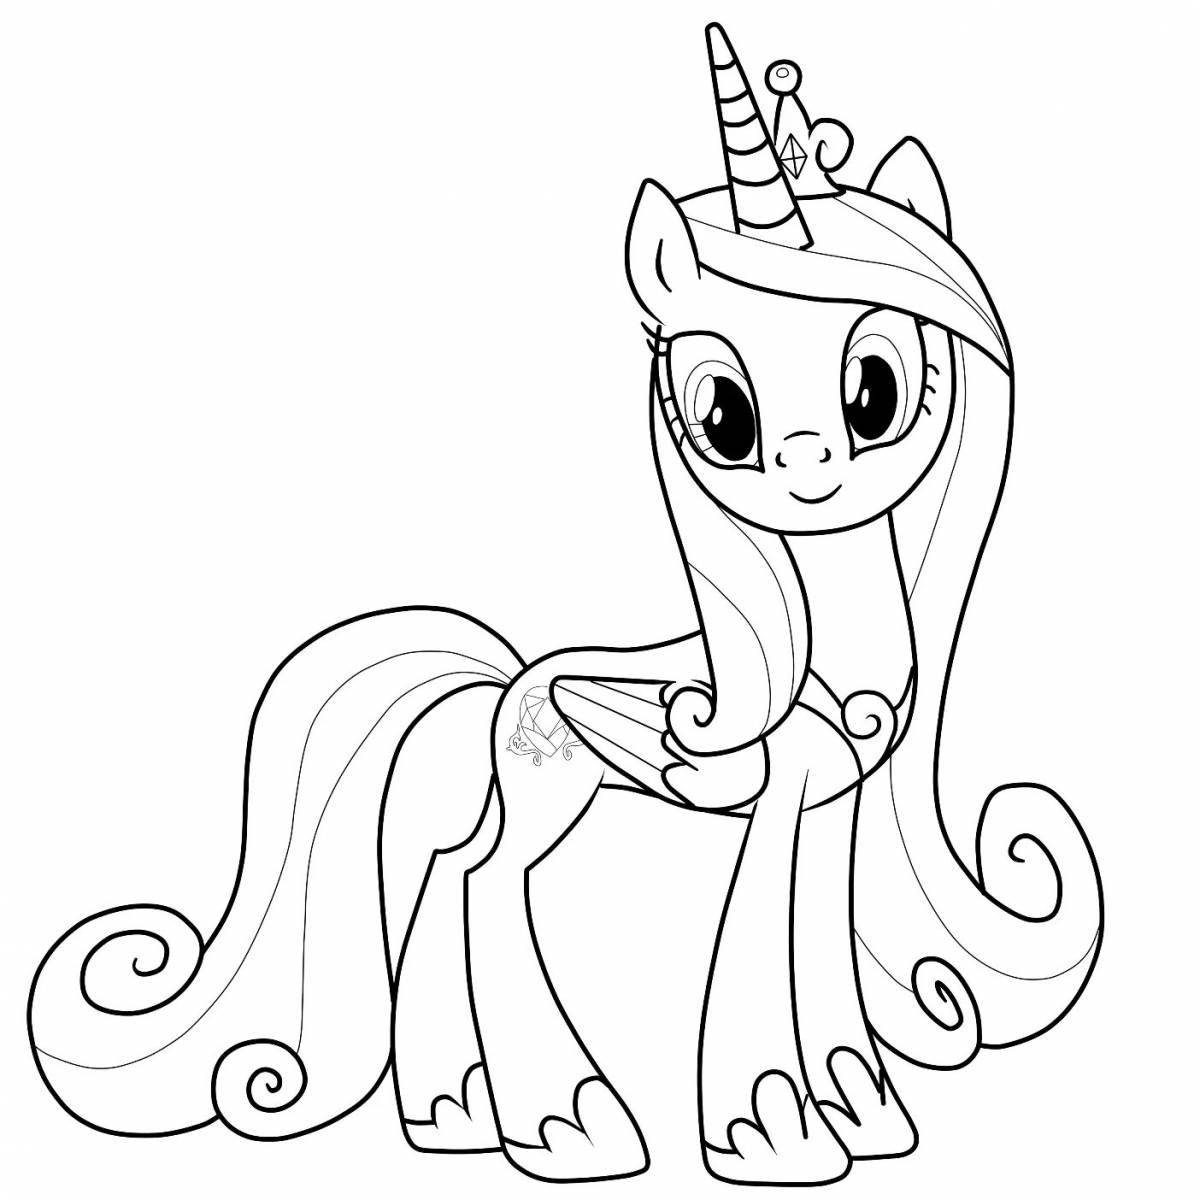 Adorable pony unicorn coloring book for girls